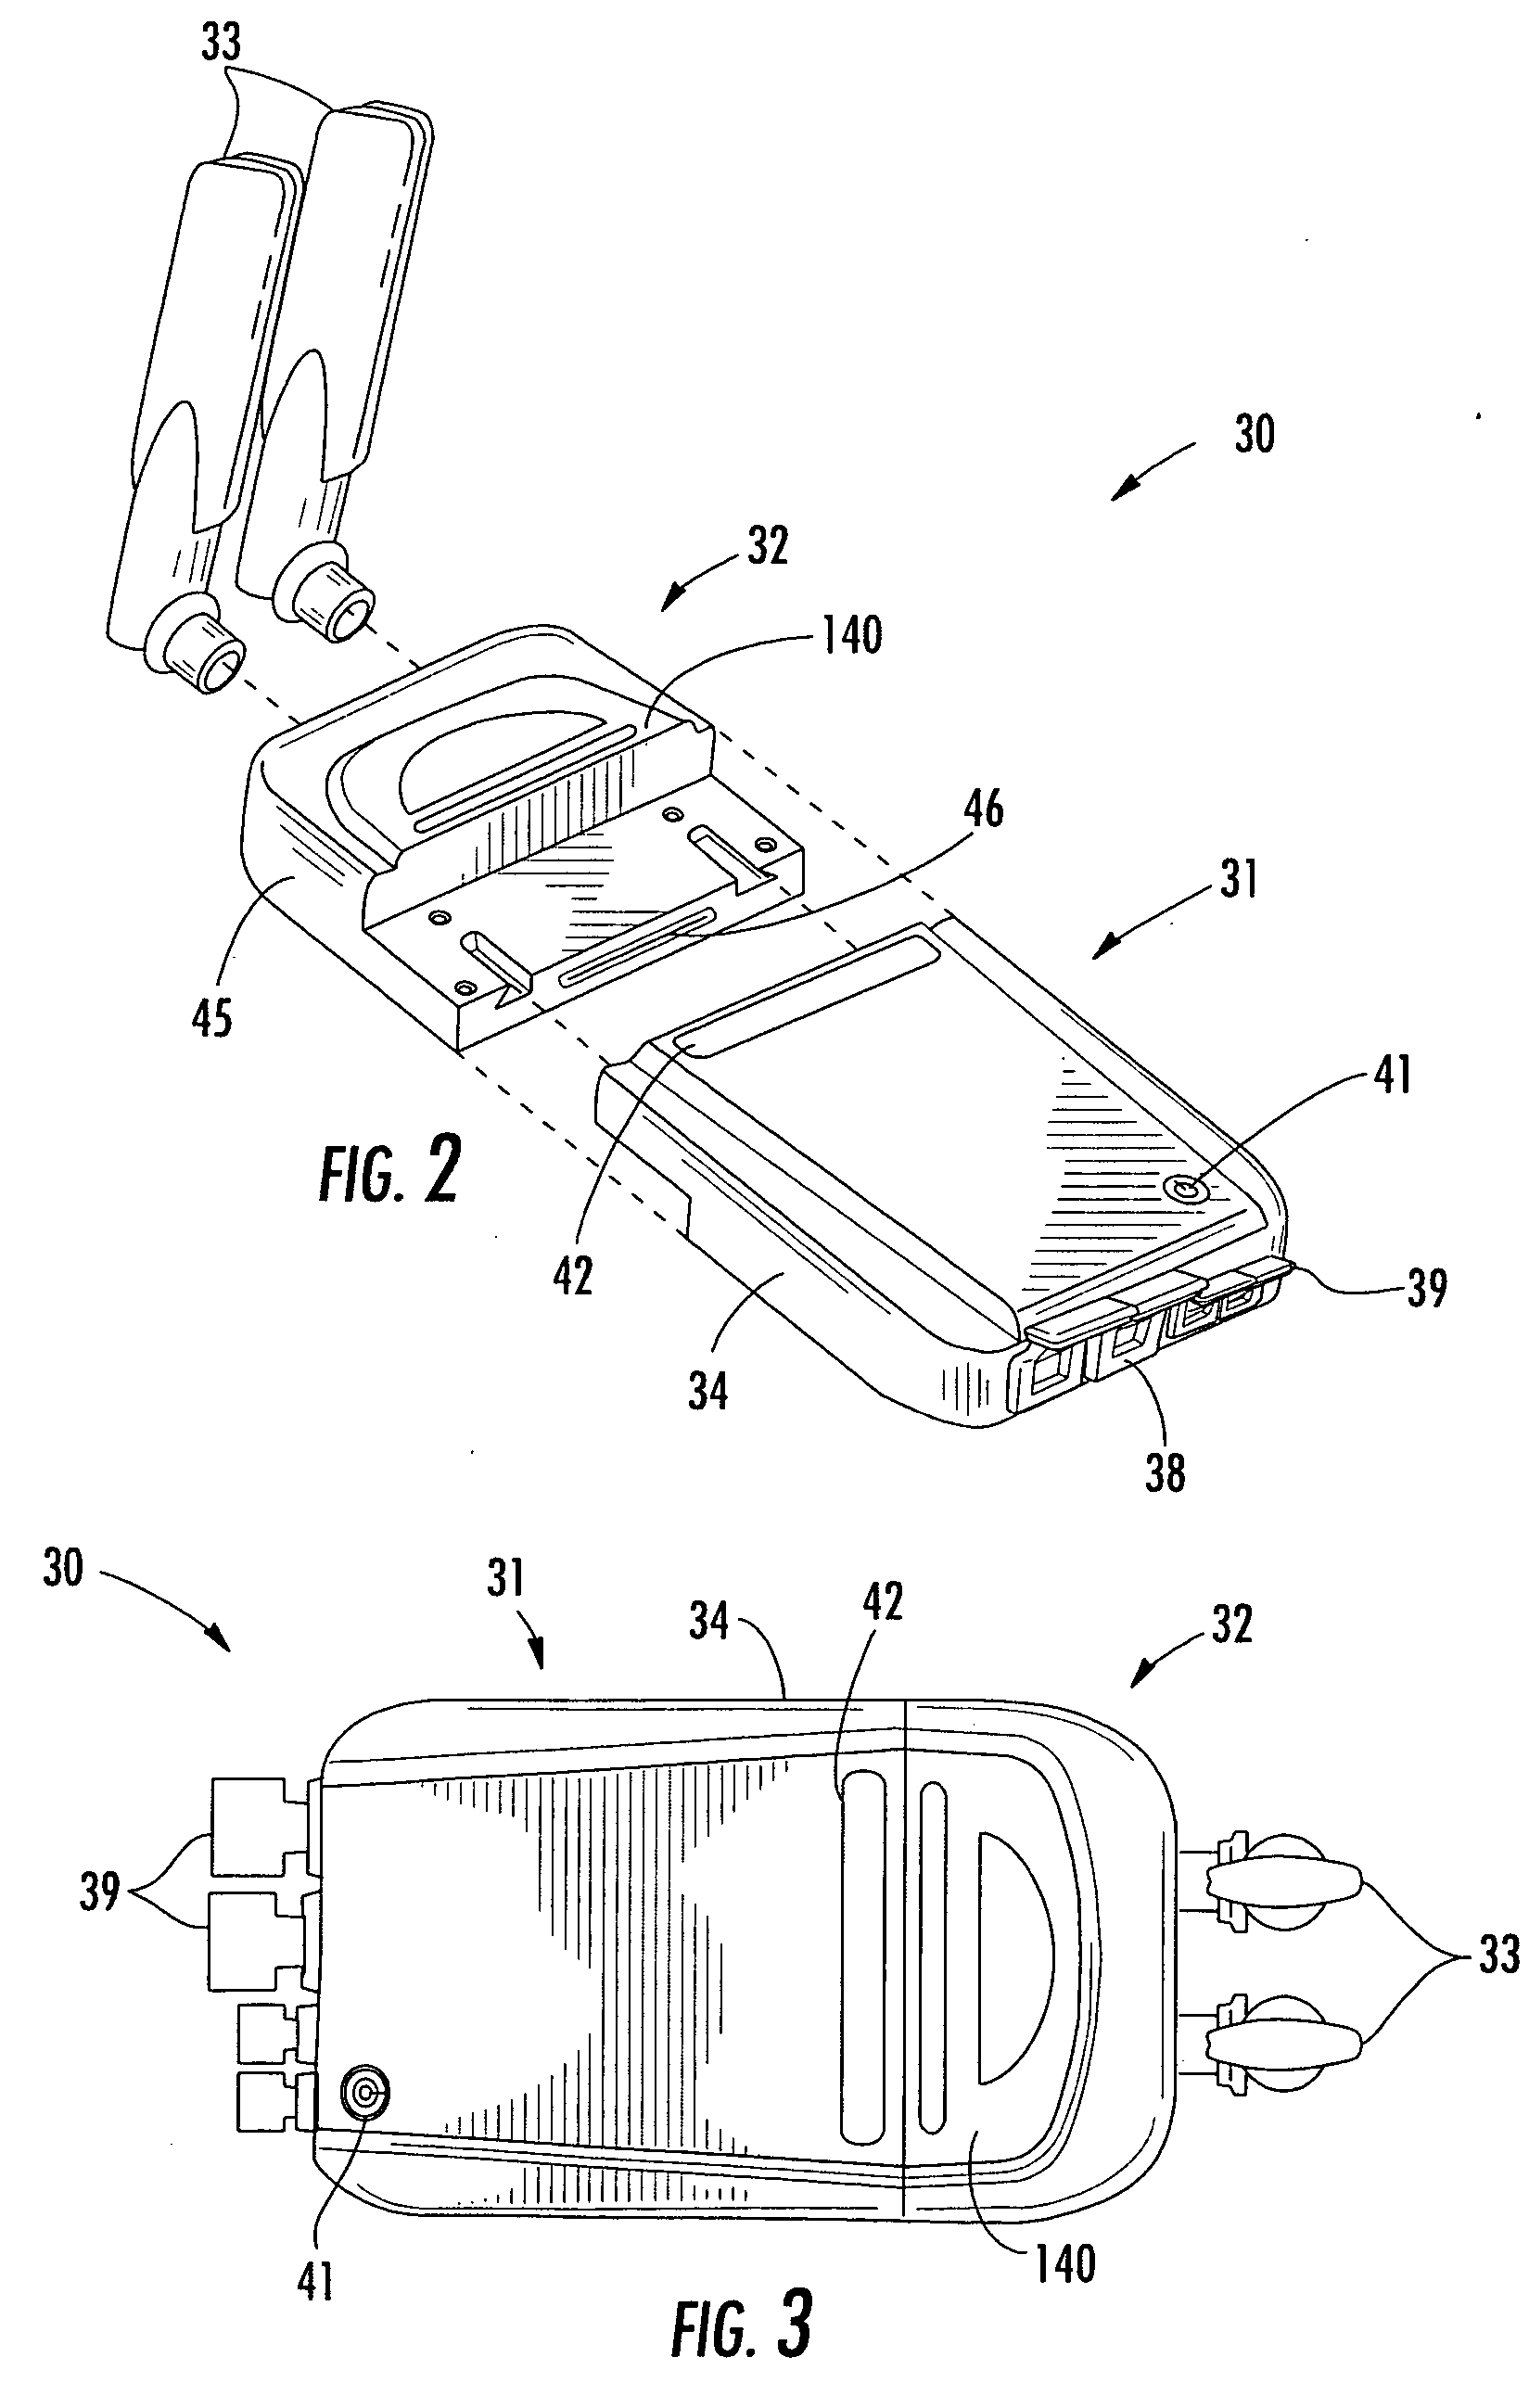 Modular cryptographic device providing status determining features and related methods